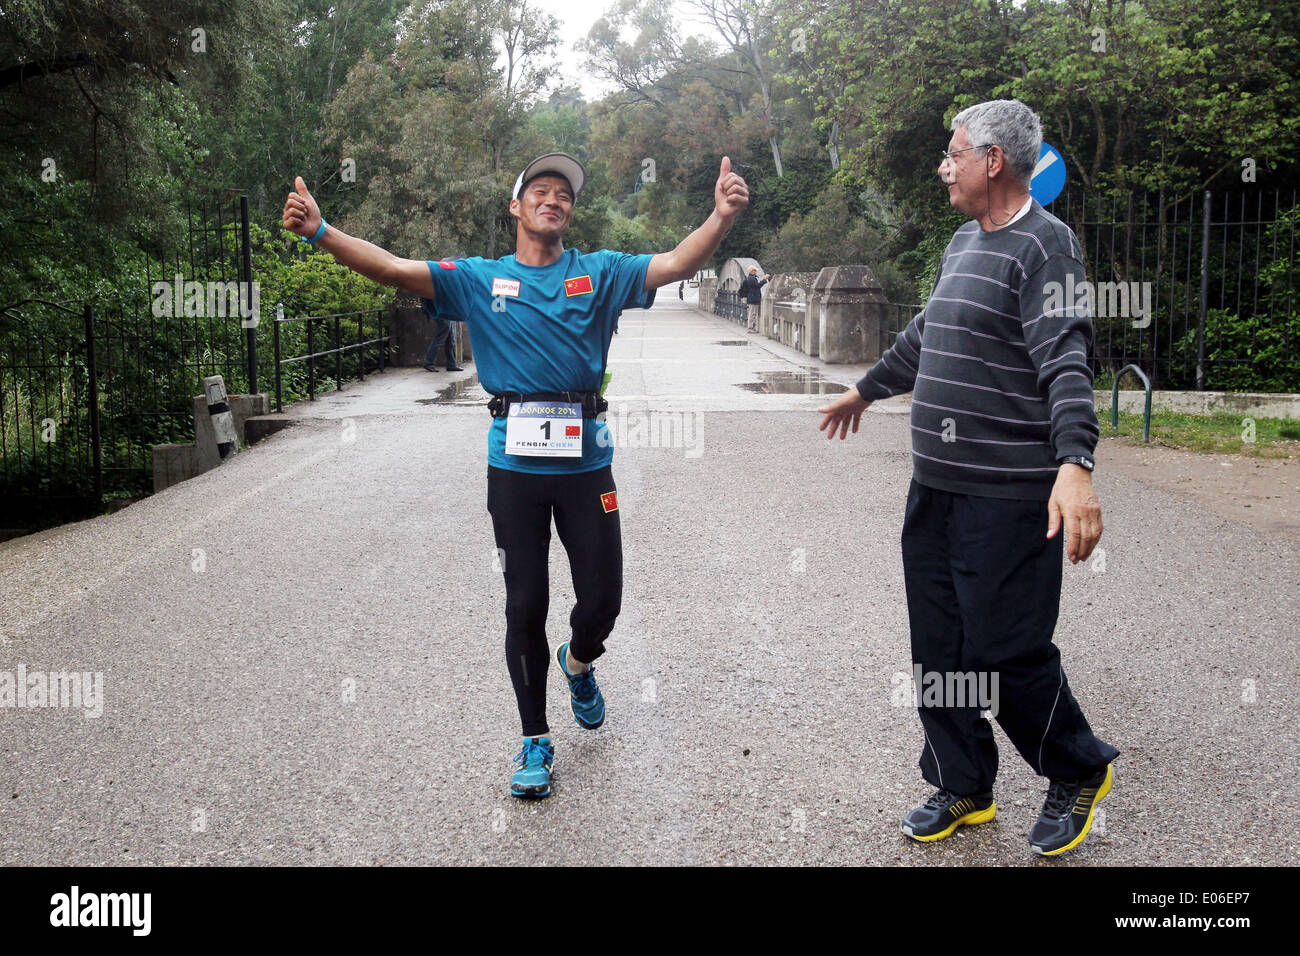 Athens, Greece. 4th May, 2014. Chinese runner Chen Penbin (L) who finished 3rd reaches the finish line during the 3rd Dolichos Ultra Marathon in front of the archaeological site of Olympia, Greece, on May 4, 2014. A total of 26 athletes started on Friday running nonstop a 255 kilometers race from Delphi in mainland Greece to the birthplace of the Olympic Games. © Marios Lolos/Xinhua/Alamy Live News Stock Photo